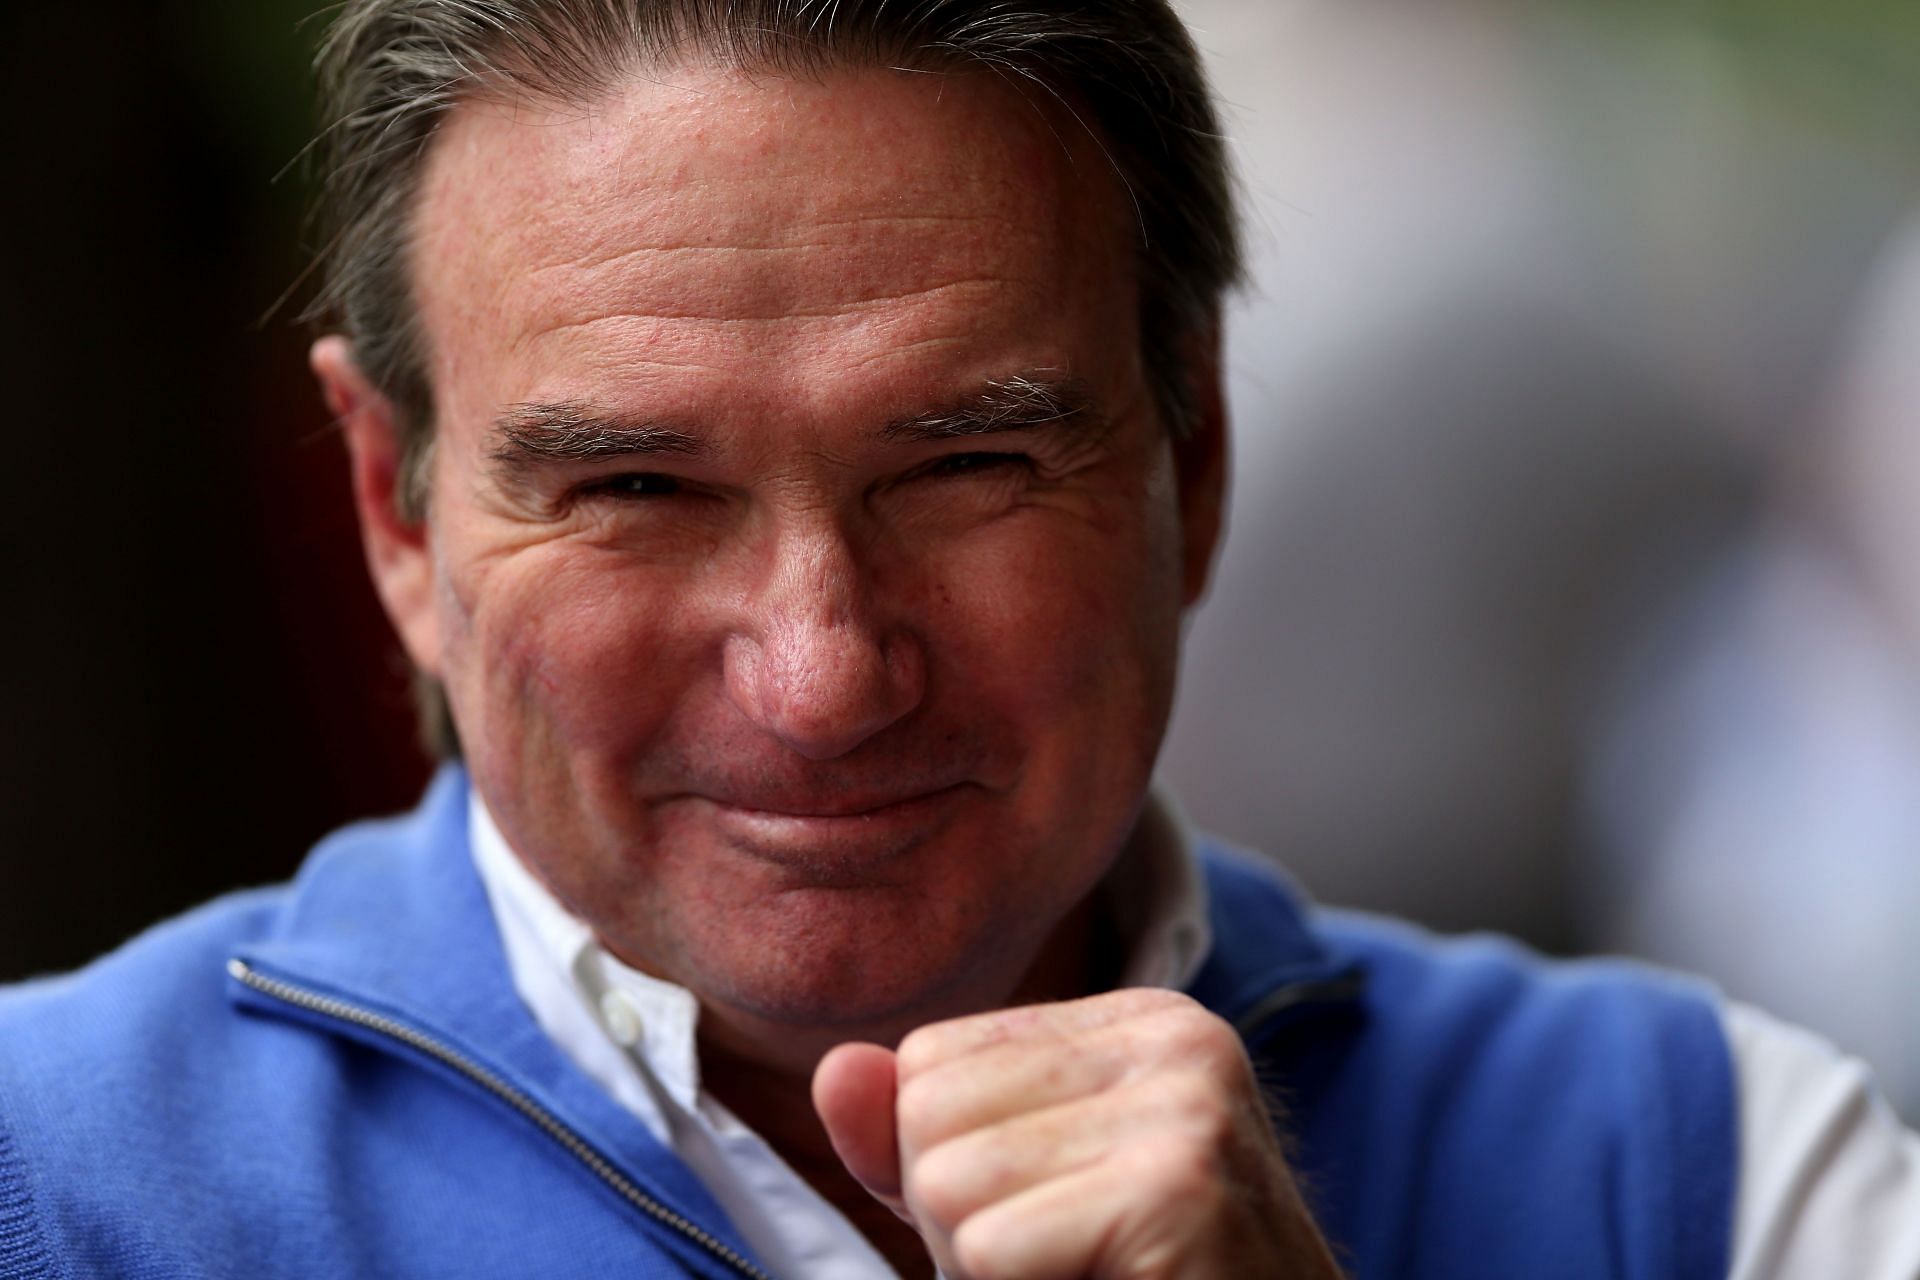 Jimmy Connors at the 2012 US Open